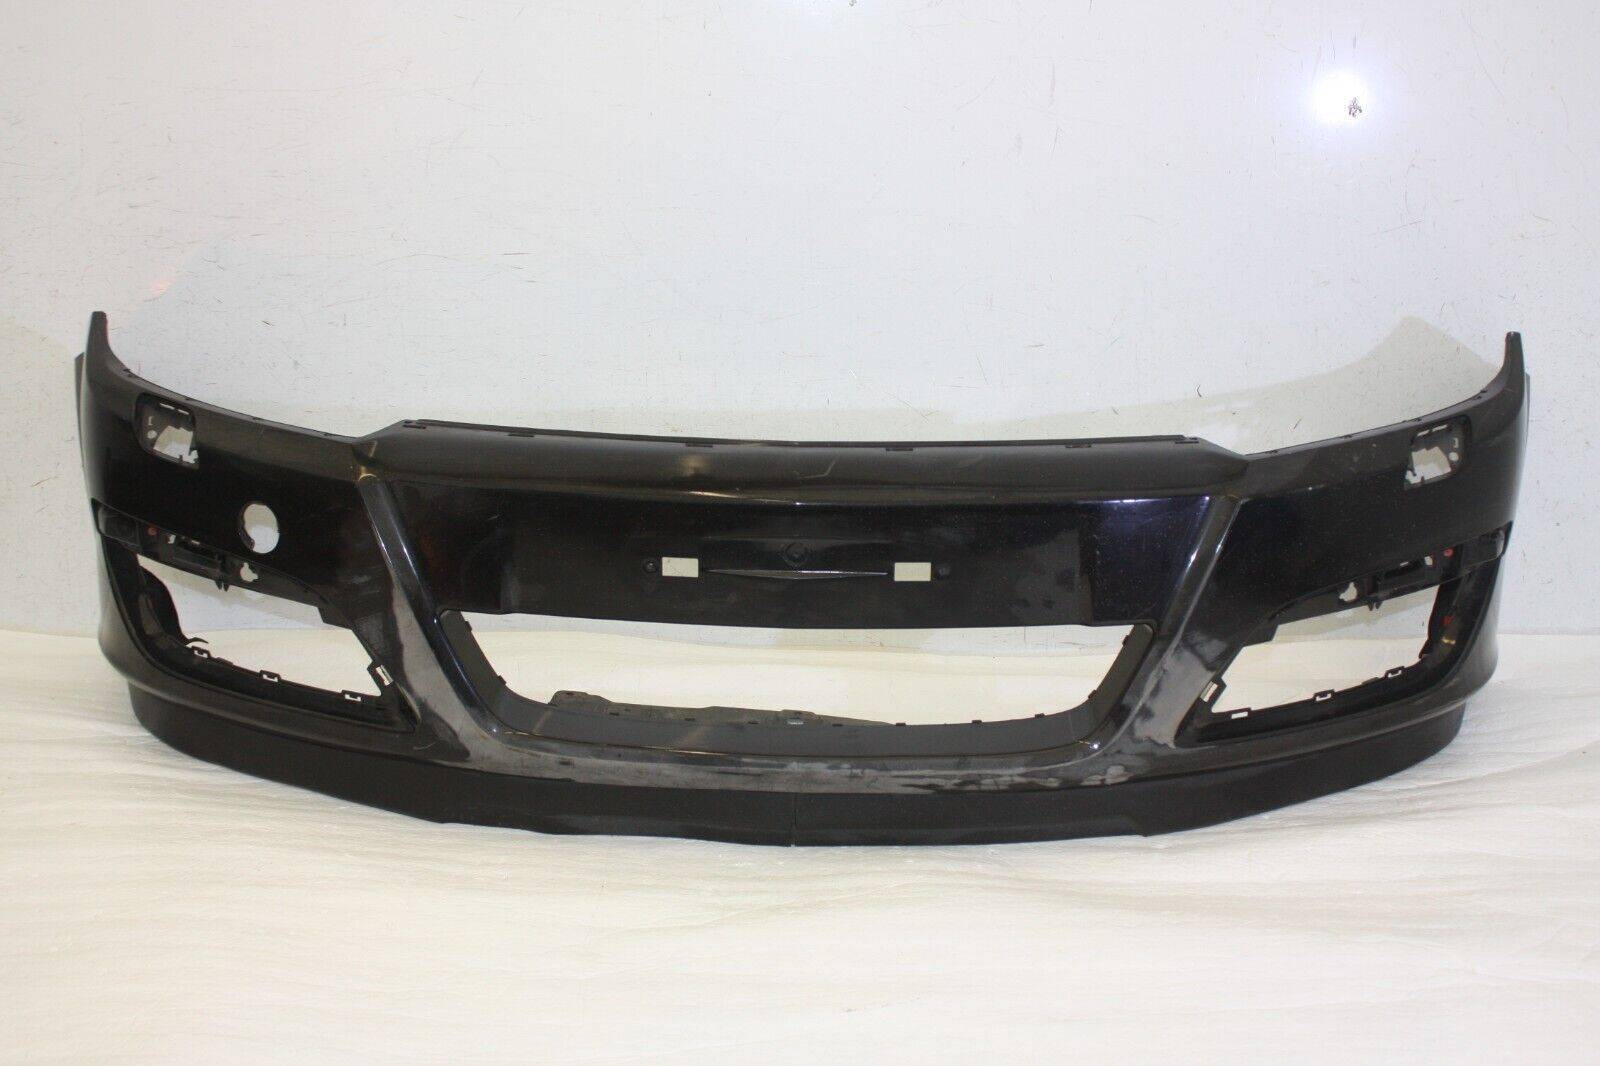 Vauxhall Astra H Front Bumper 2004 To 2009 544294945 Genuine 176371982501